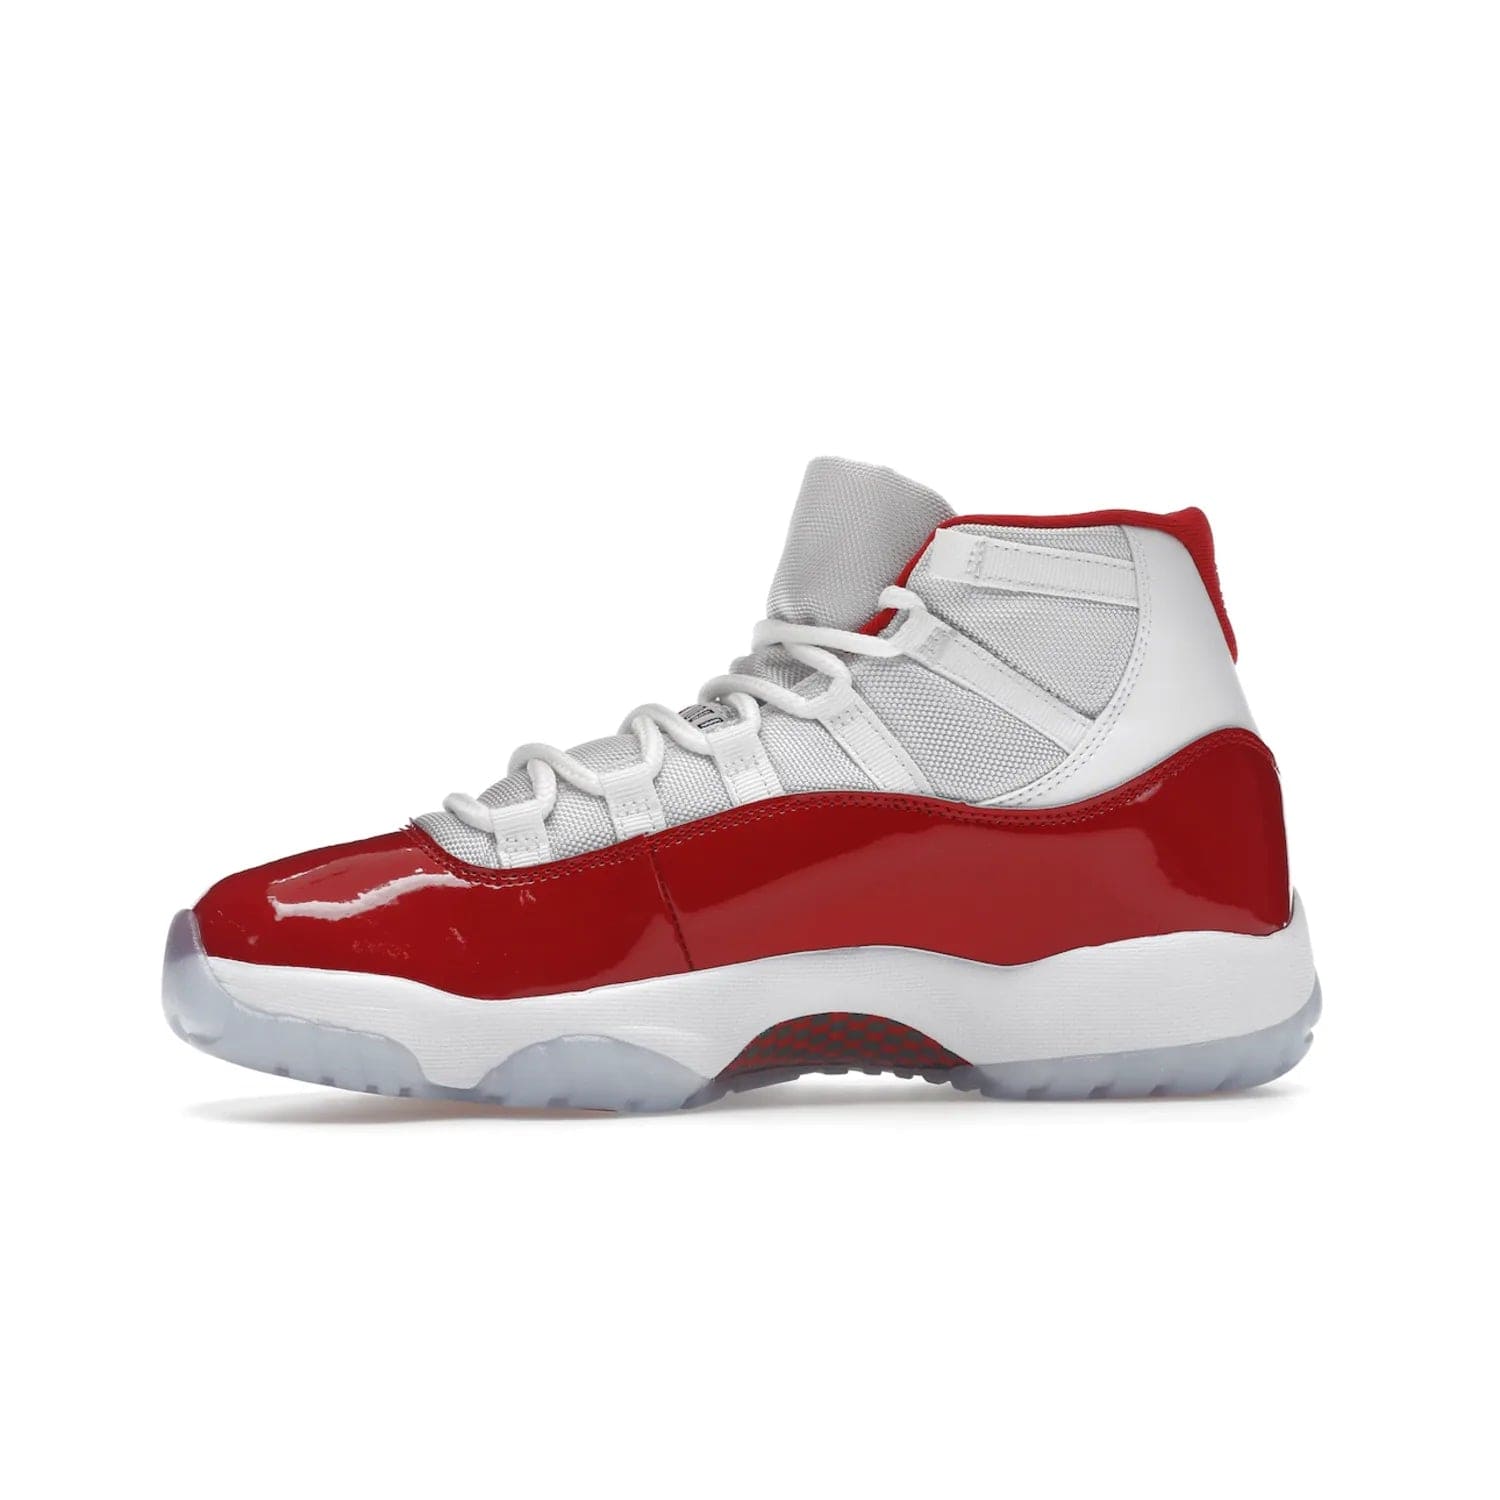 Jordan 11 Retro Cherry (2022) - Image 18 - Only at www.BallersClubKickz.com - The Air Jordan 11 Cherry features classic patent leather with Cherry red accents, icy blue outsole, and debossed 23 on the heel tab. Refresh your sneaker game with this iconic update, available December 10, 2022.